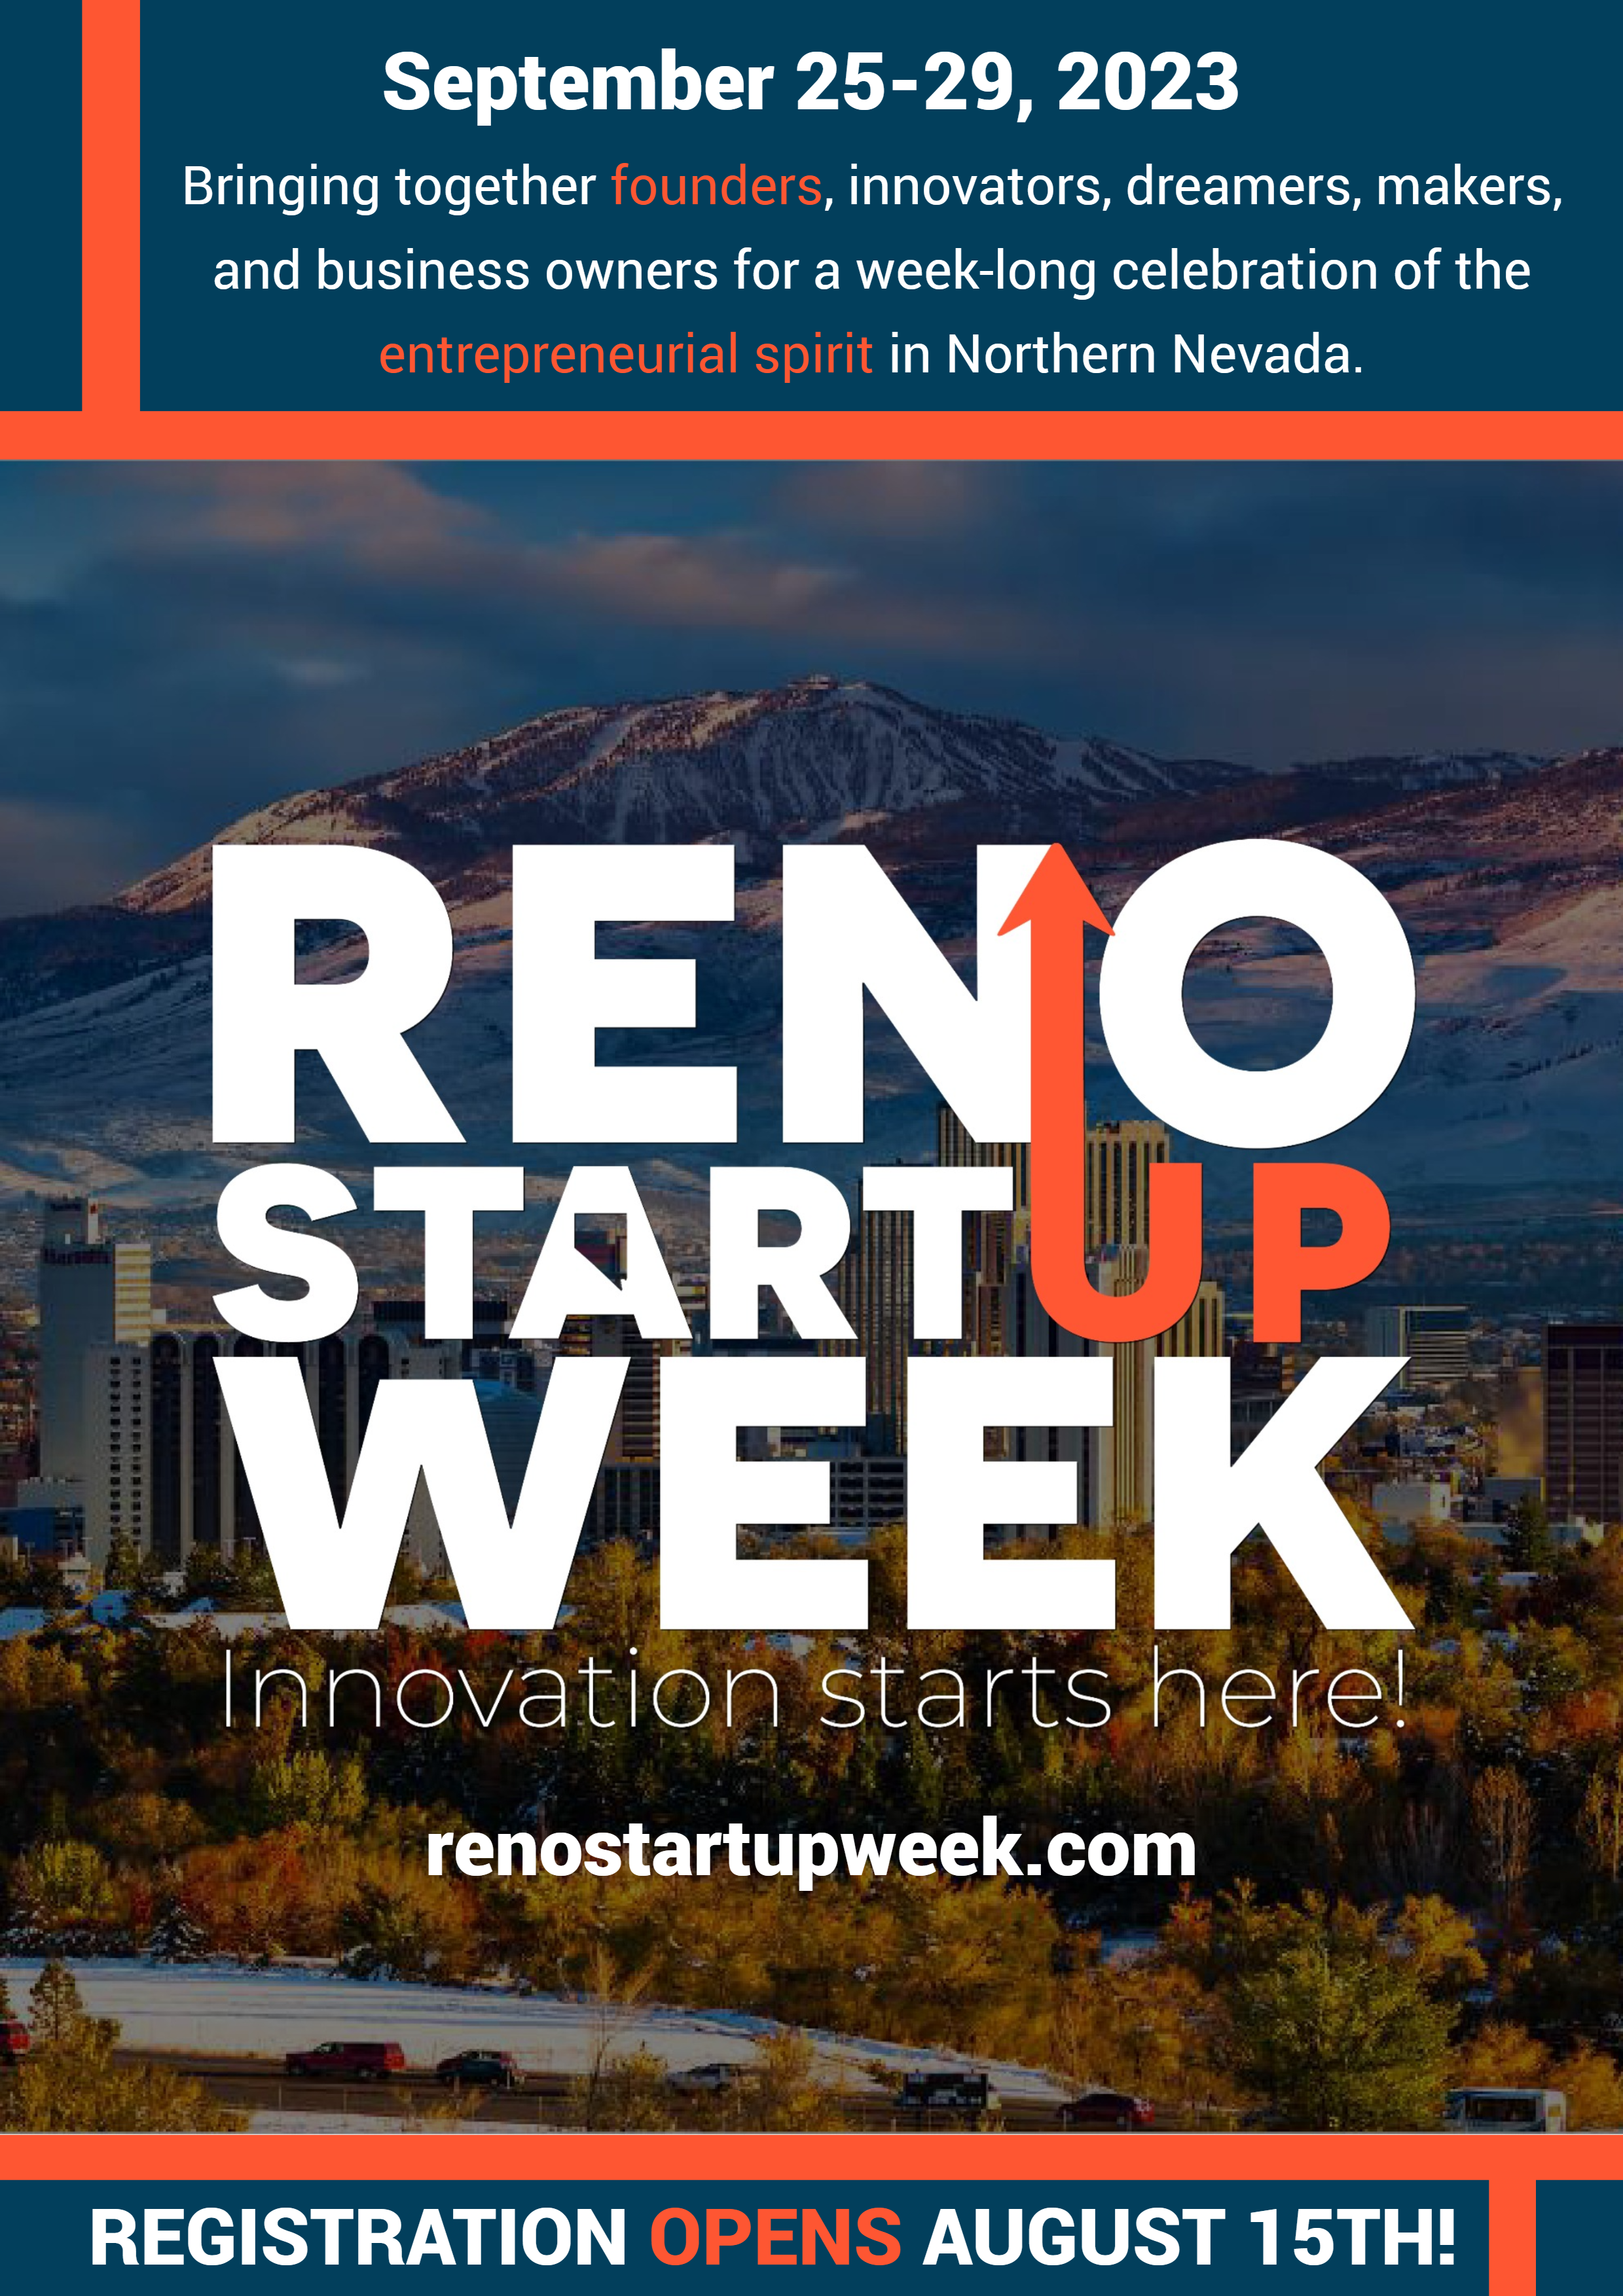 Featured image showing the flyer for Reno Startup Week